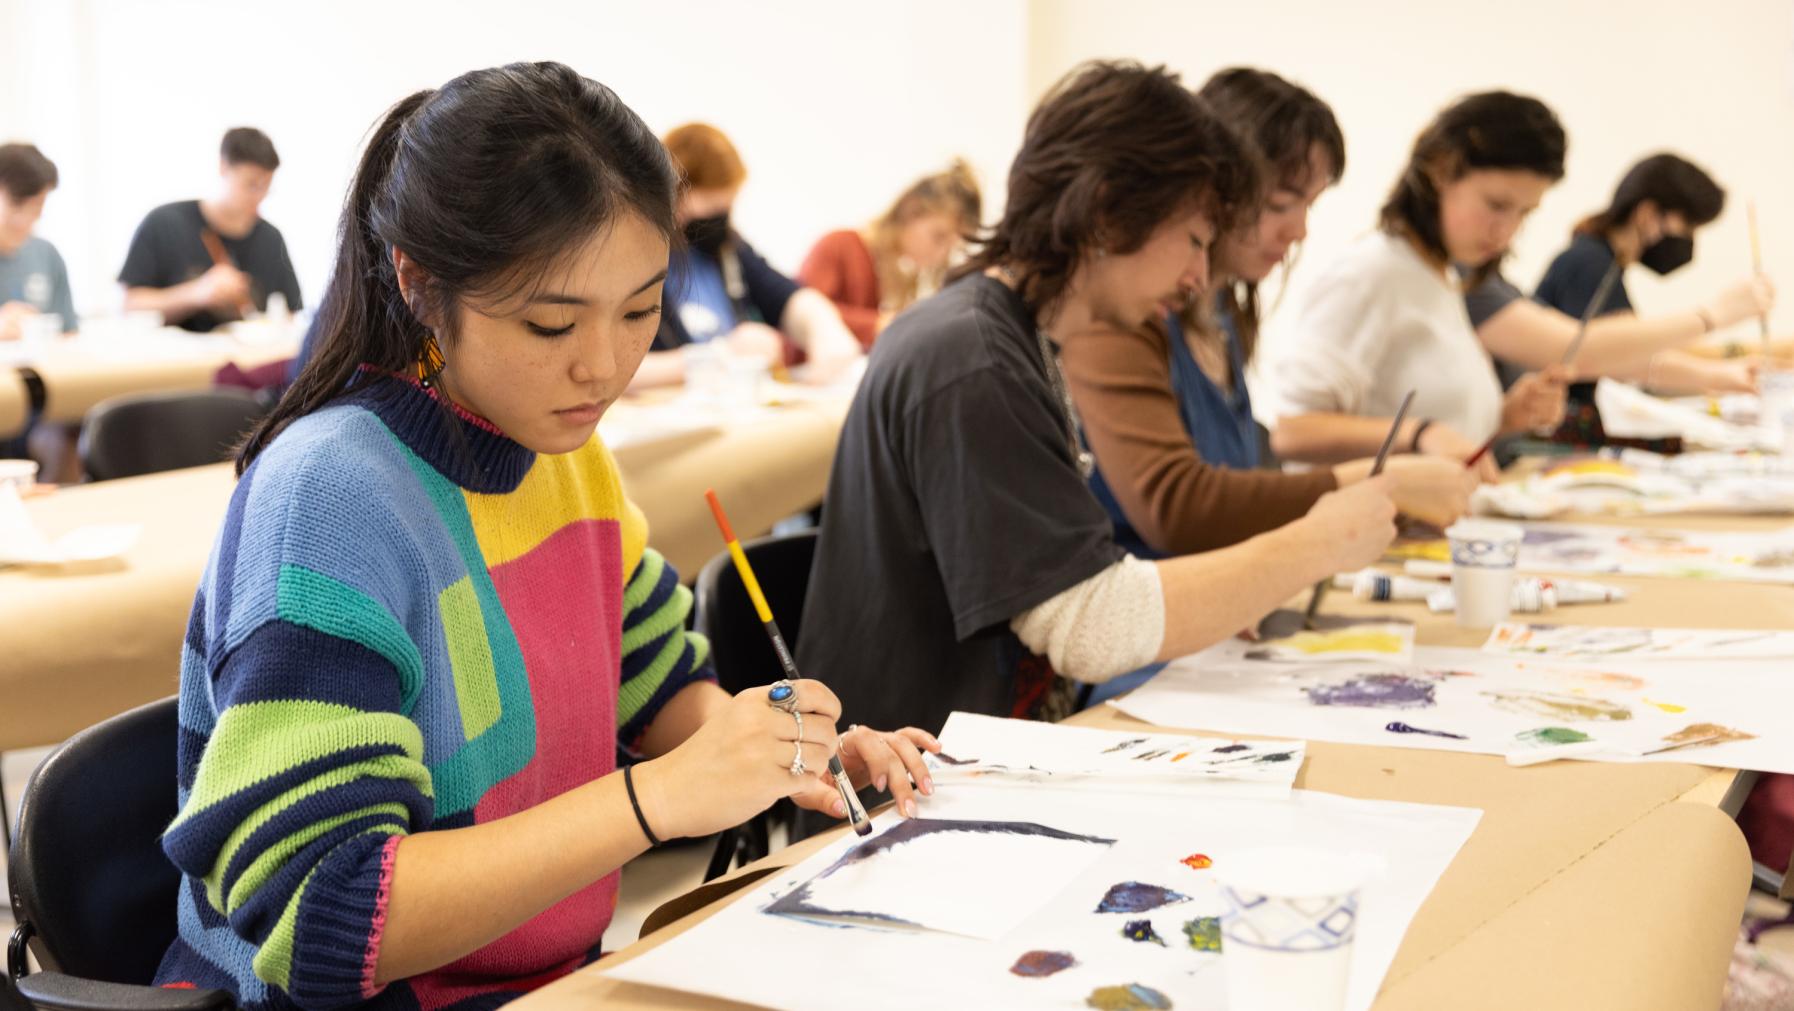 A student in a colorful sweater paints during a studio session.